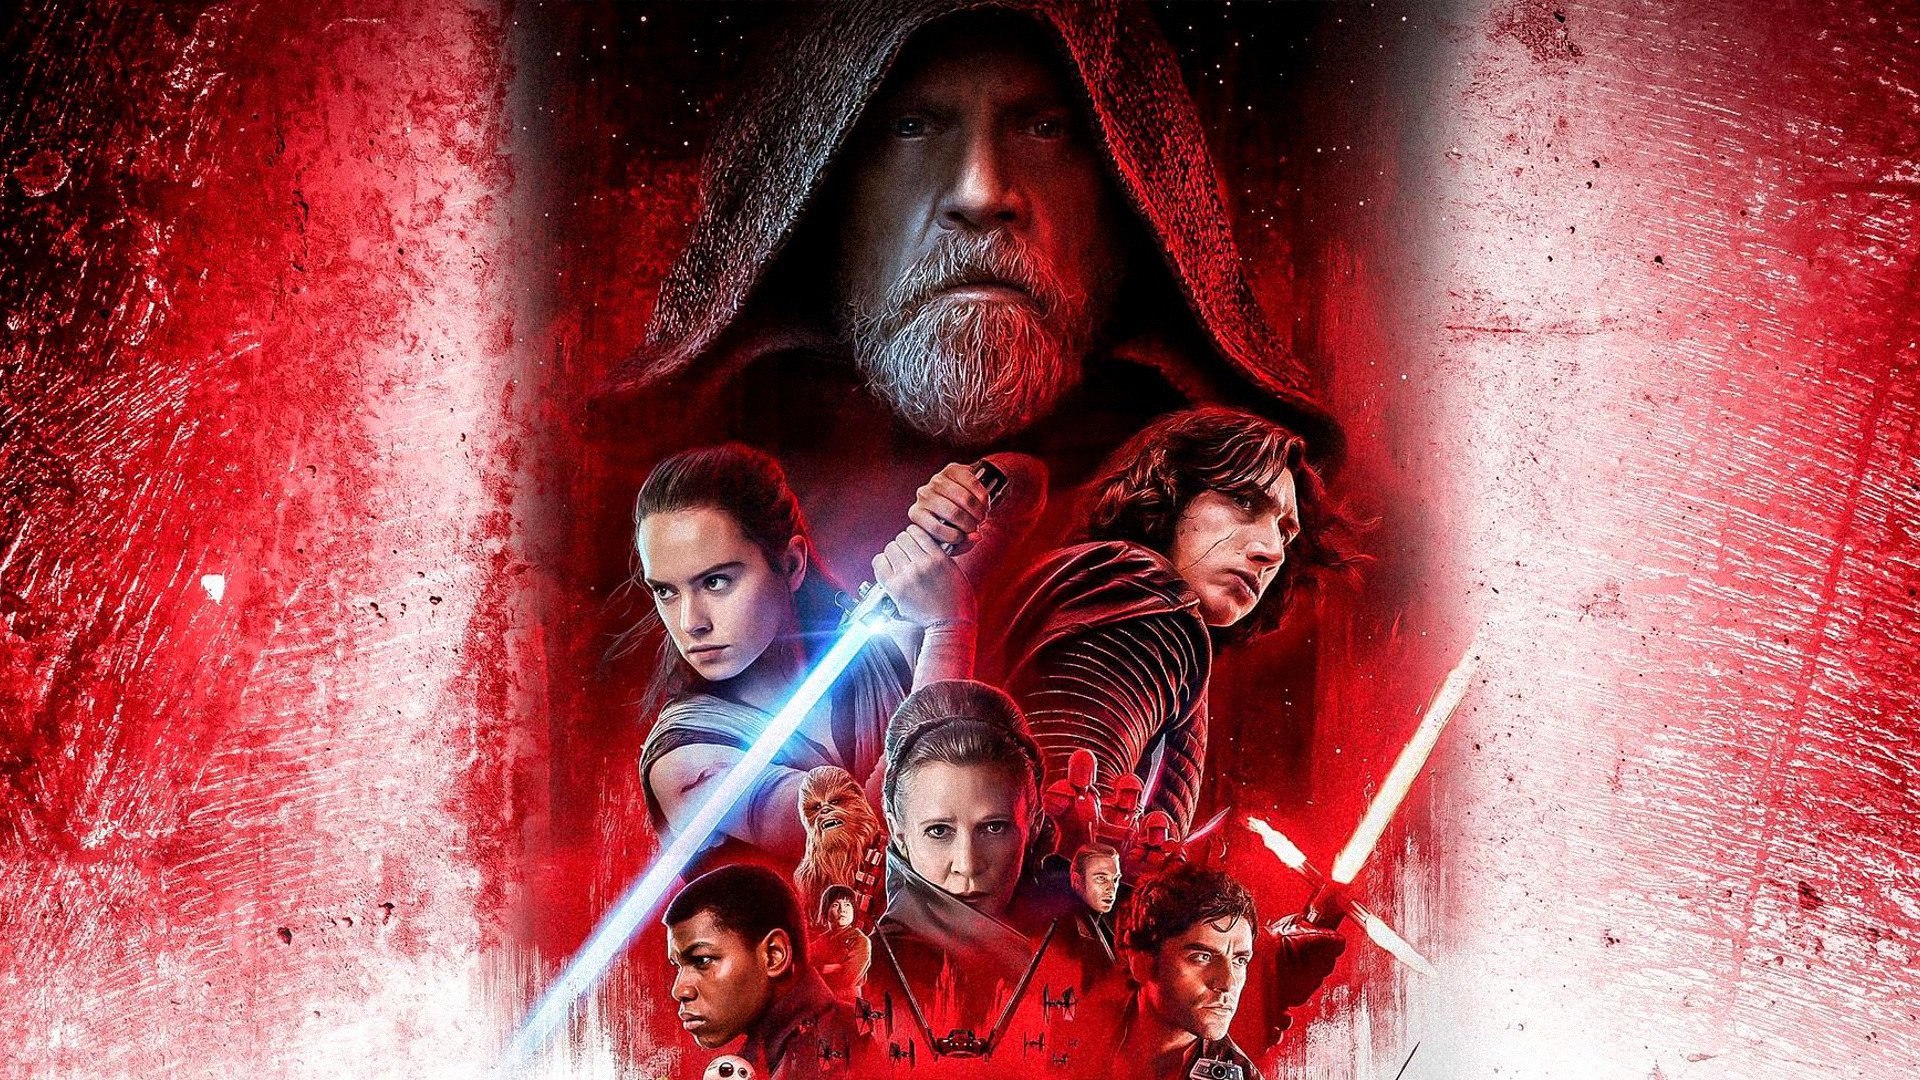 Star Wars The Last Jedi Wallpapers Pictures Images